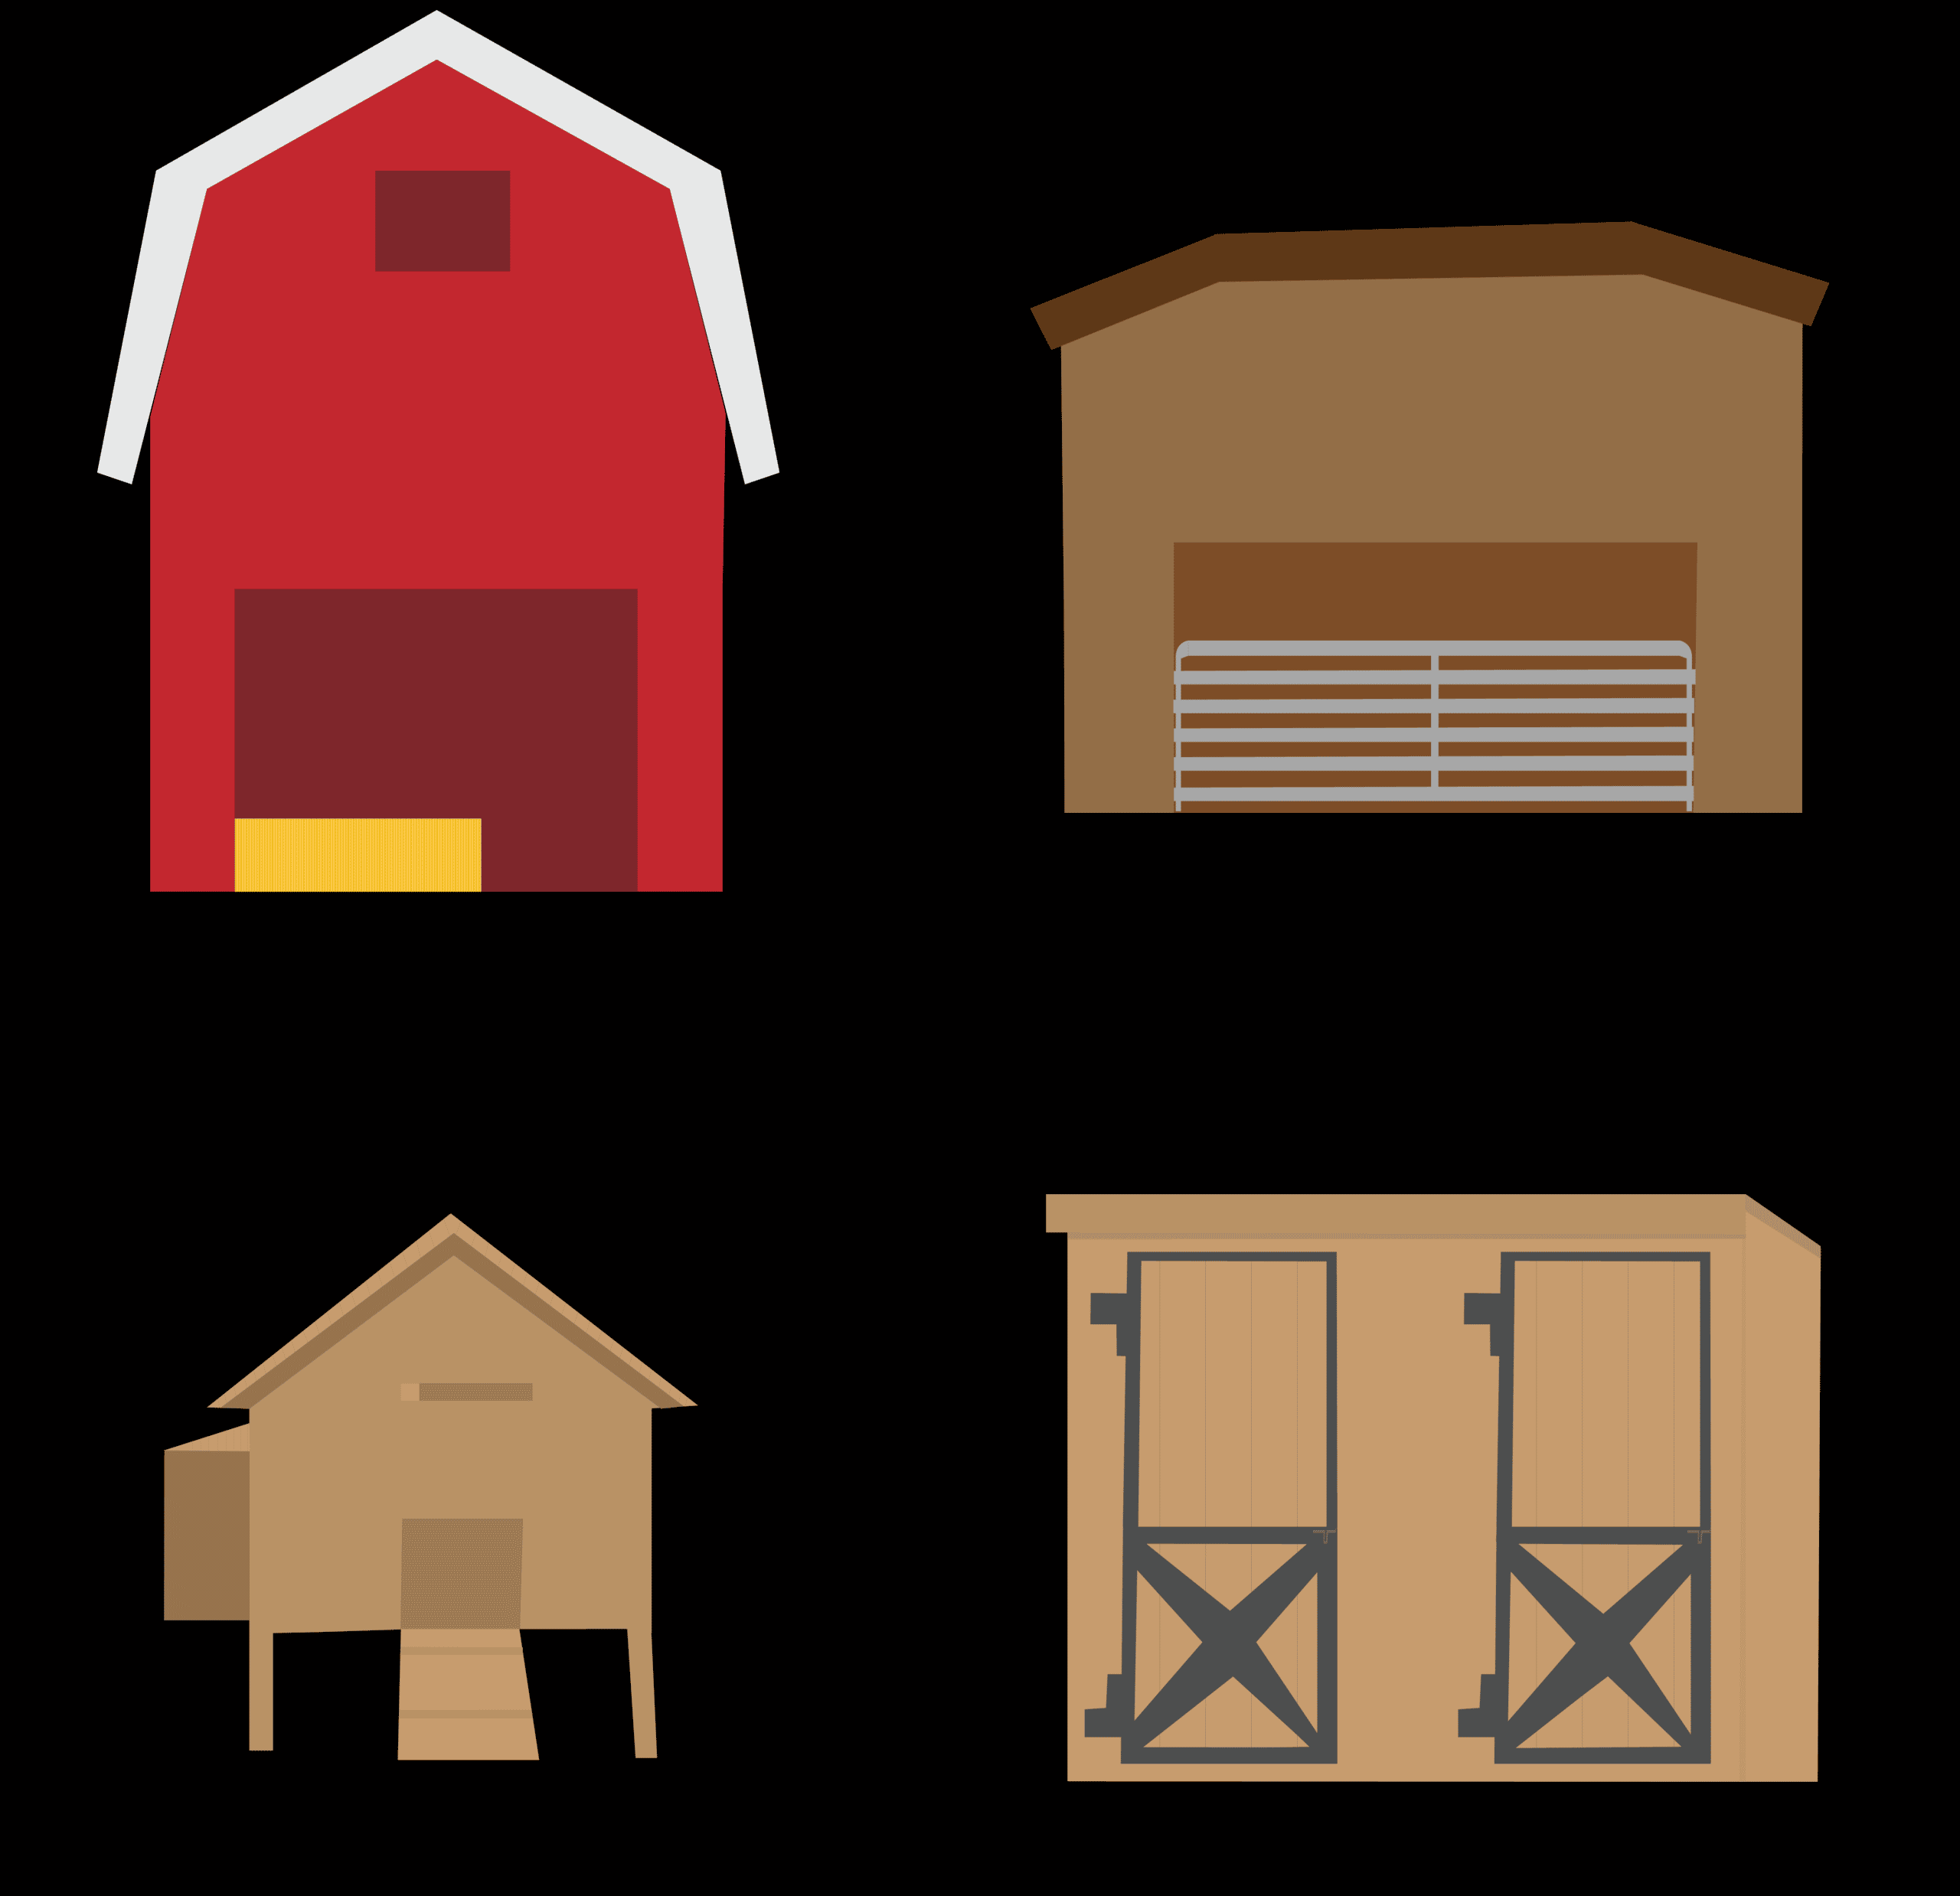 A Cow Barn, Stable, Chicken Coop, and Goat Barn